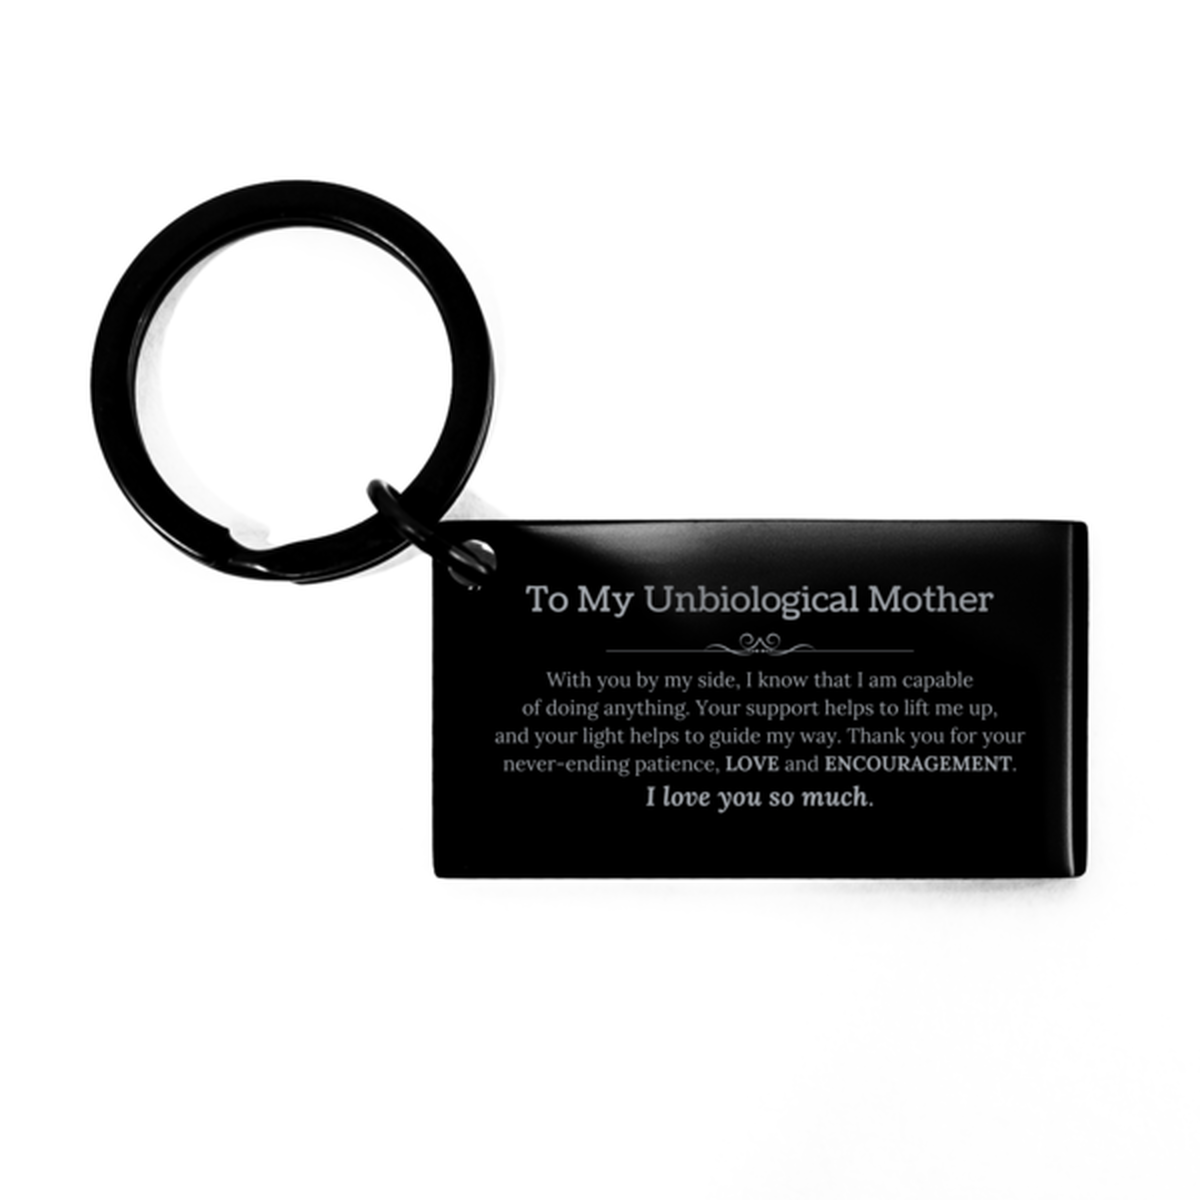 Appreciation Unbiological Mother Keychain Gifts, To My Unbiological Mother Birthday Christmas Wedding Keepsake Gifts for Unbiological Mother With you by my side, I know that I am capable of doing anything. I love you so much